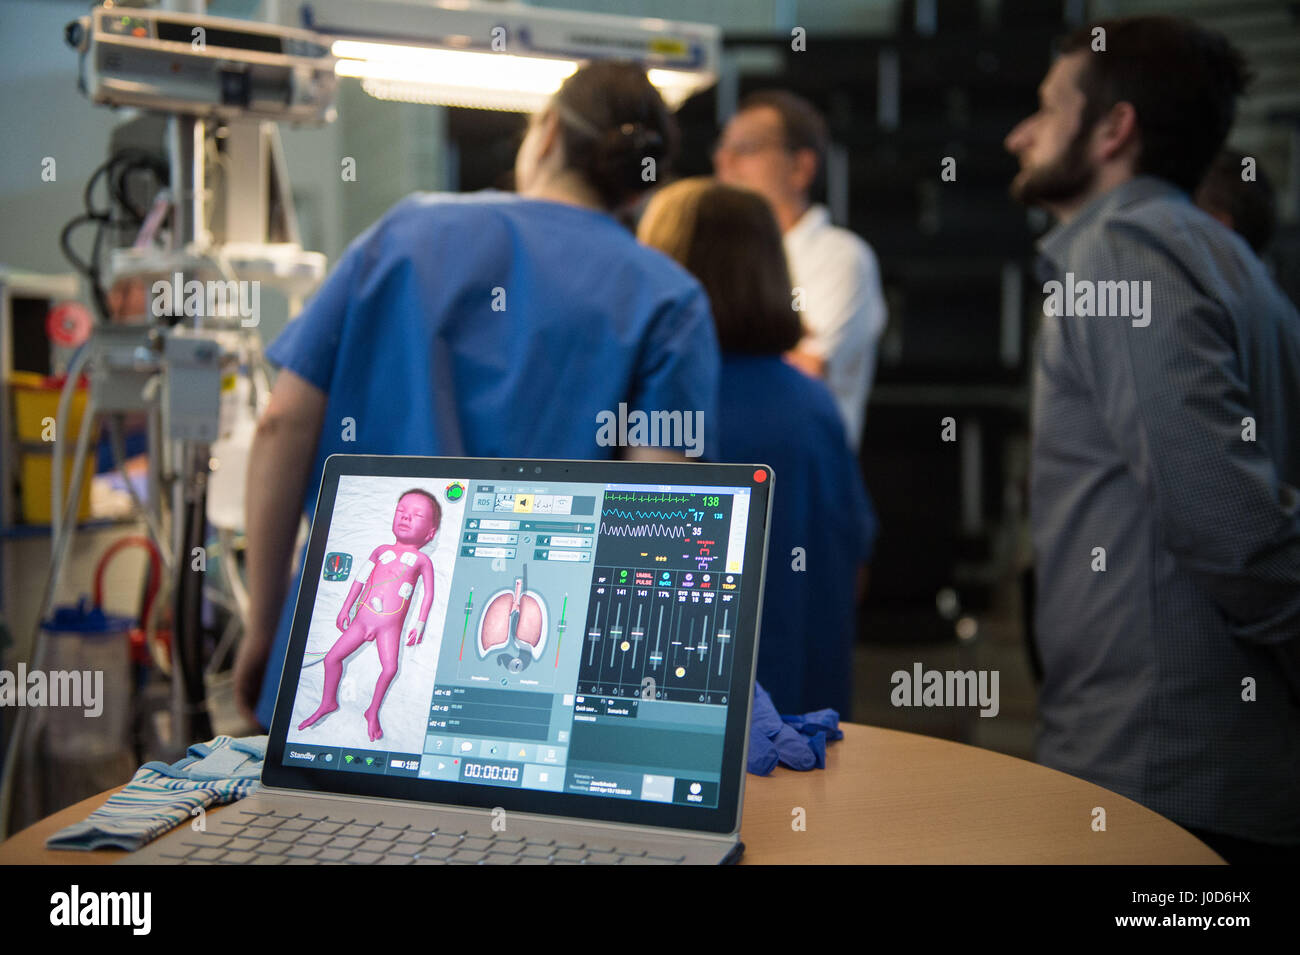 Tuebingen, Germany. 12th Apr, 2017. A laptop with an opened configuration screen in the women's clinic in Tuebingen, Germany, 12 April 2017. 'Paul', a premature birth simulation system, can simulate a variety of scenarios and is used for training purposes in the hospital. Photo: Lino Mirgeler/dpa/Alamy Live News Stock Photo